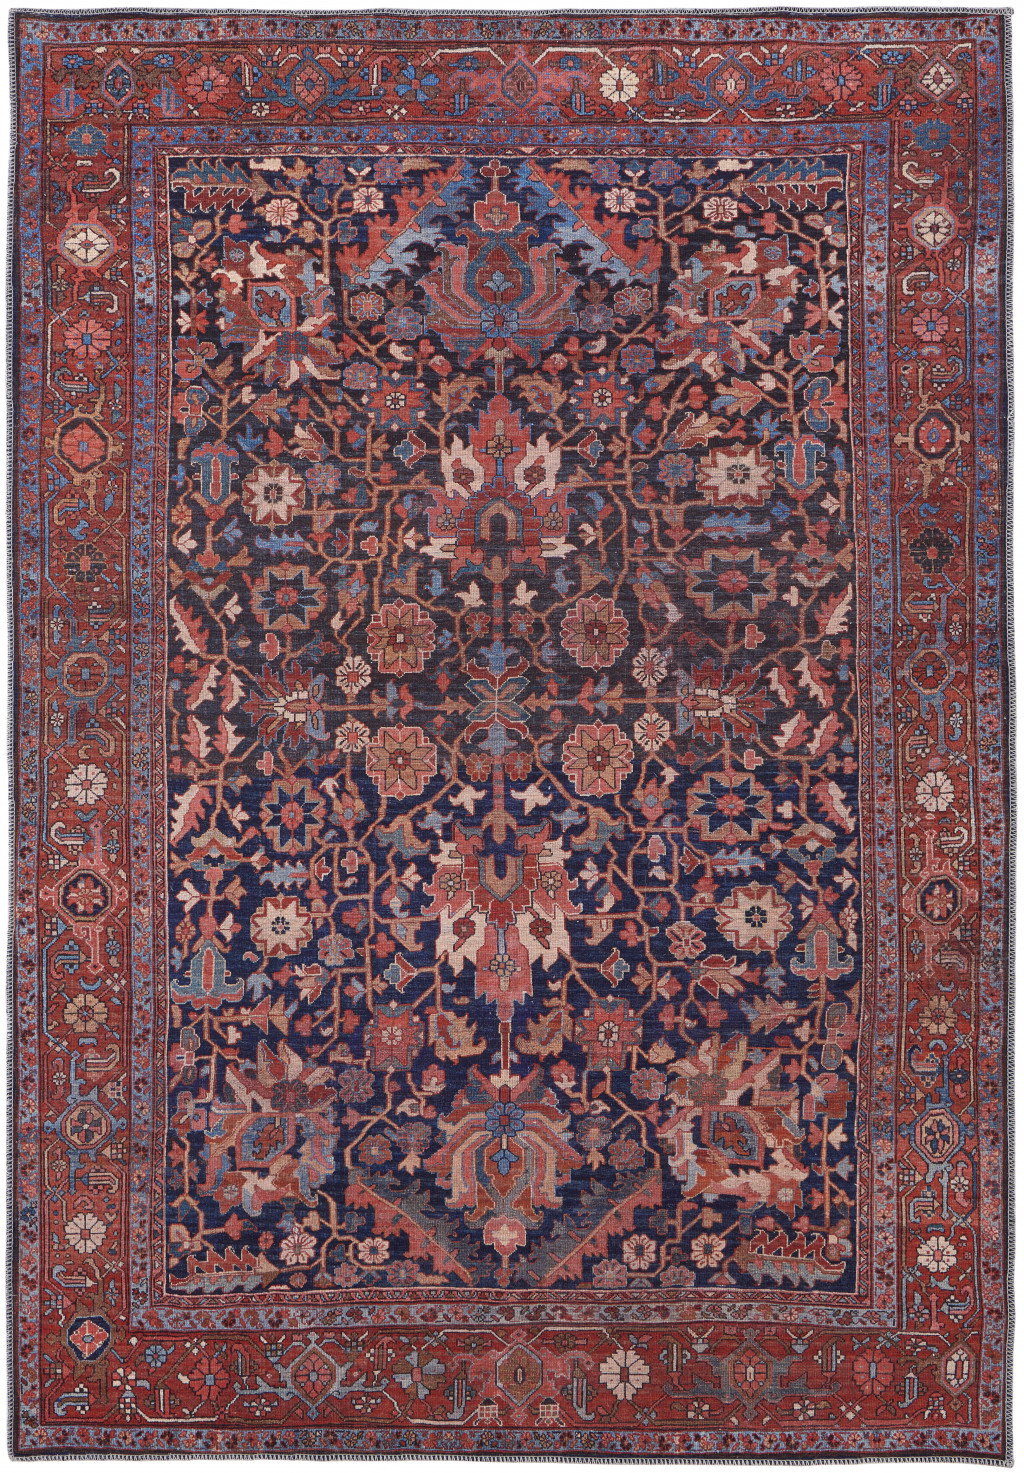 5' X 8' Red Orange And Blue Floral Power Loom Area Rug-515120-1